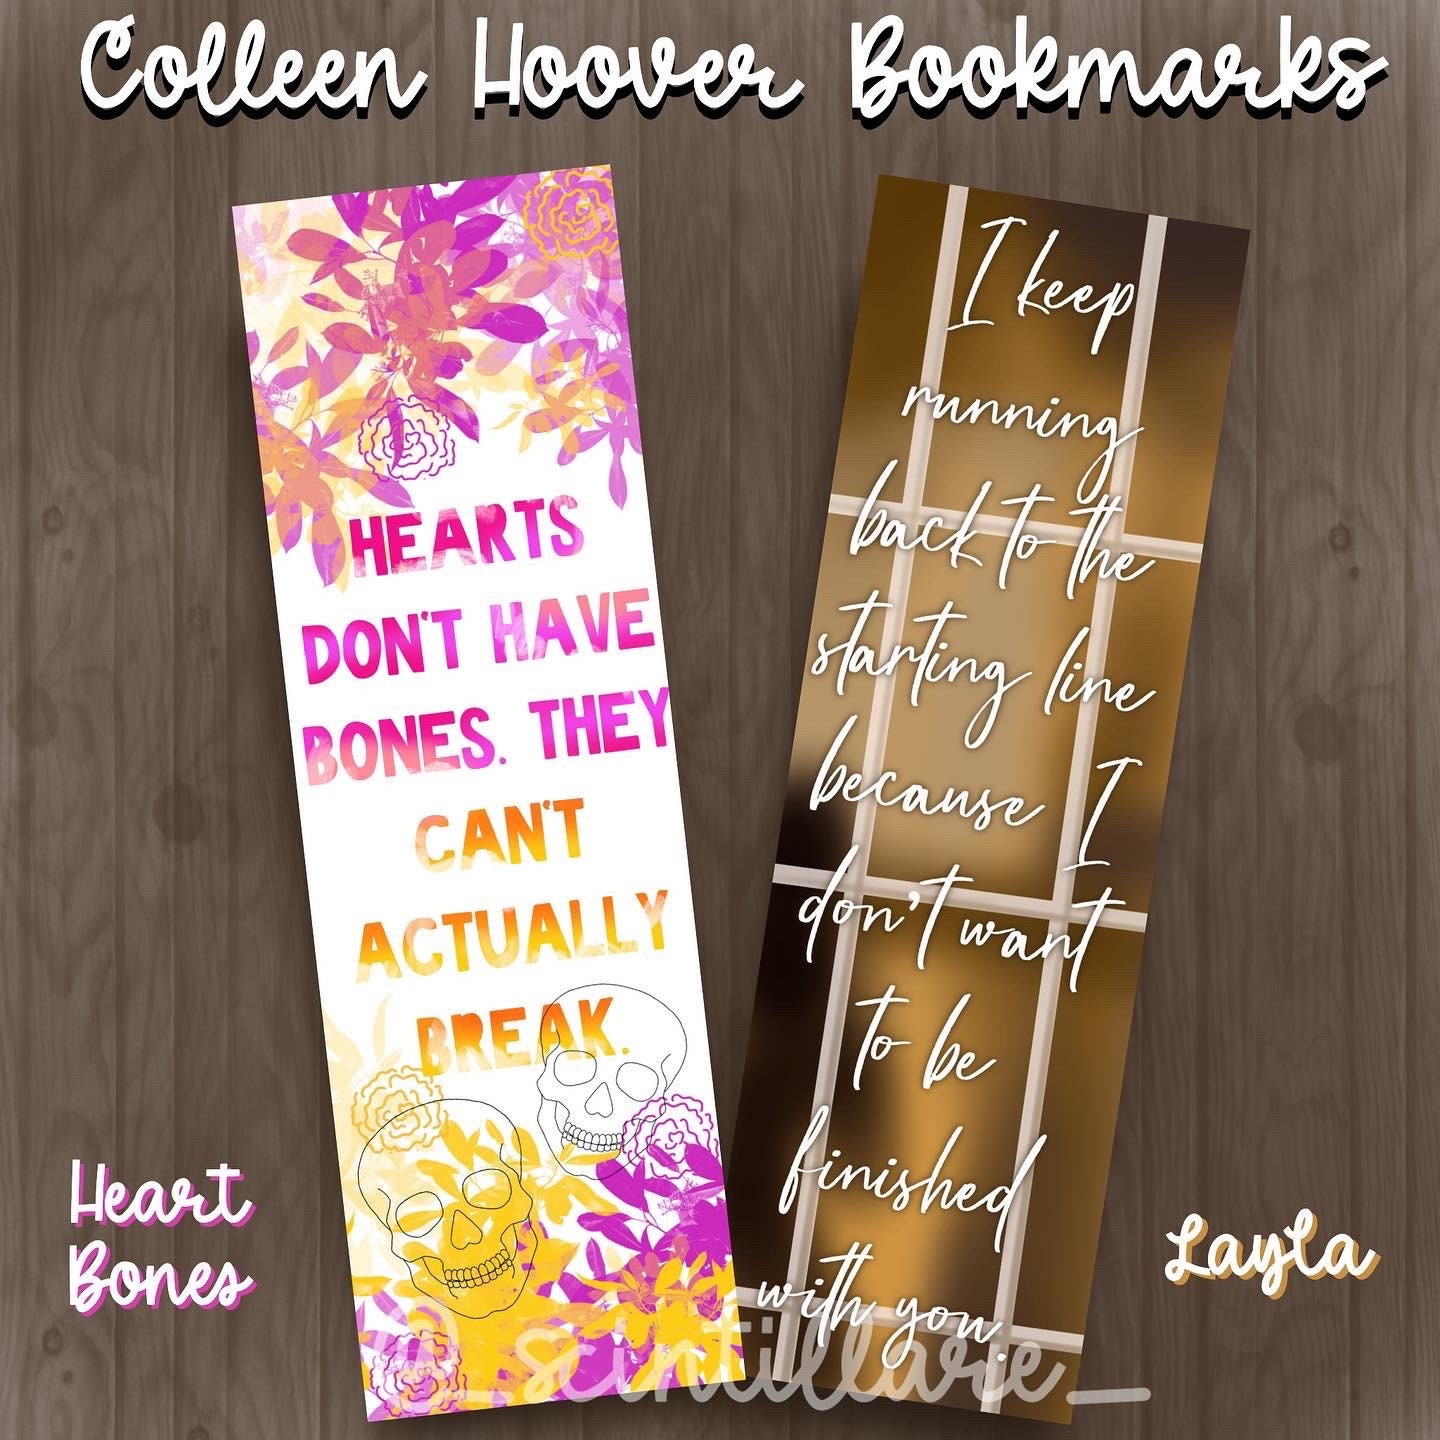 Layla by Colleen Hoover (English, Paperback) by Colleen Hoover